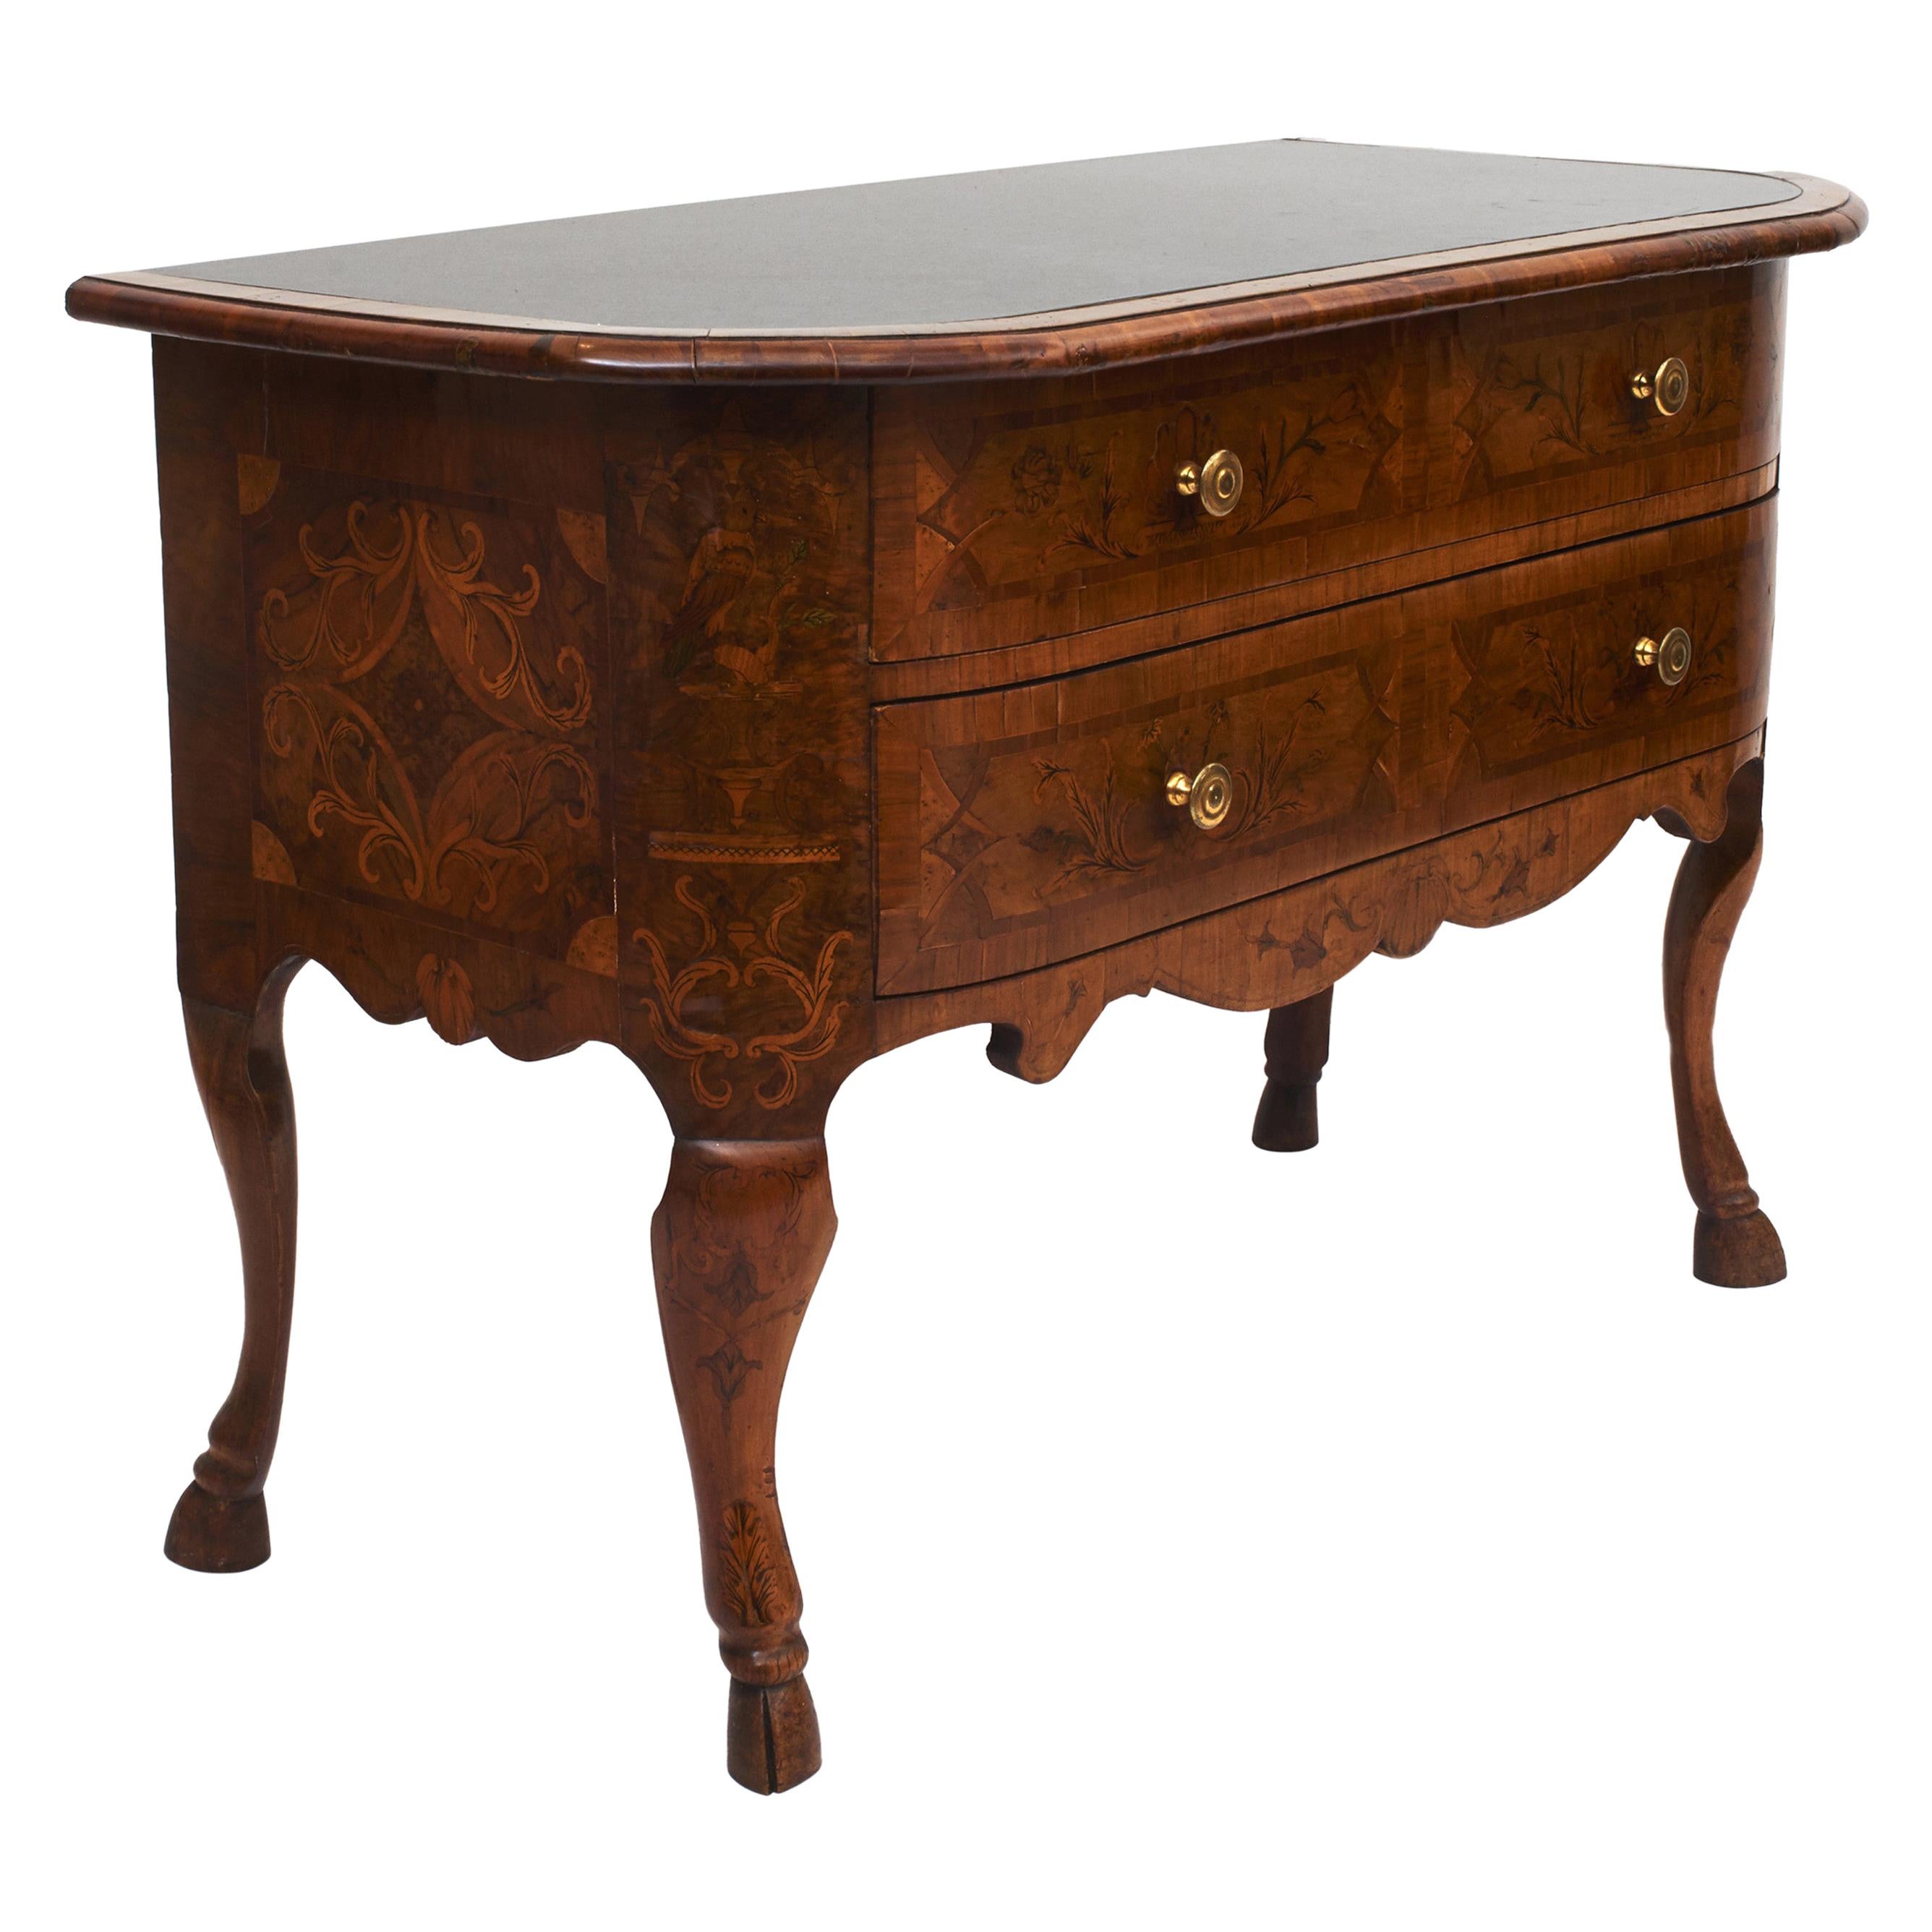 Baroque Chest of Drawers Walnut veneer with Marquetry Deco. Castle Furniture For Sale